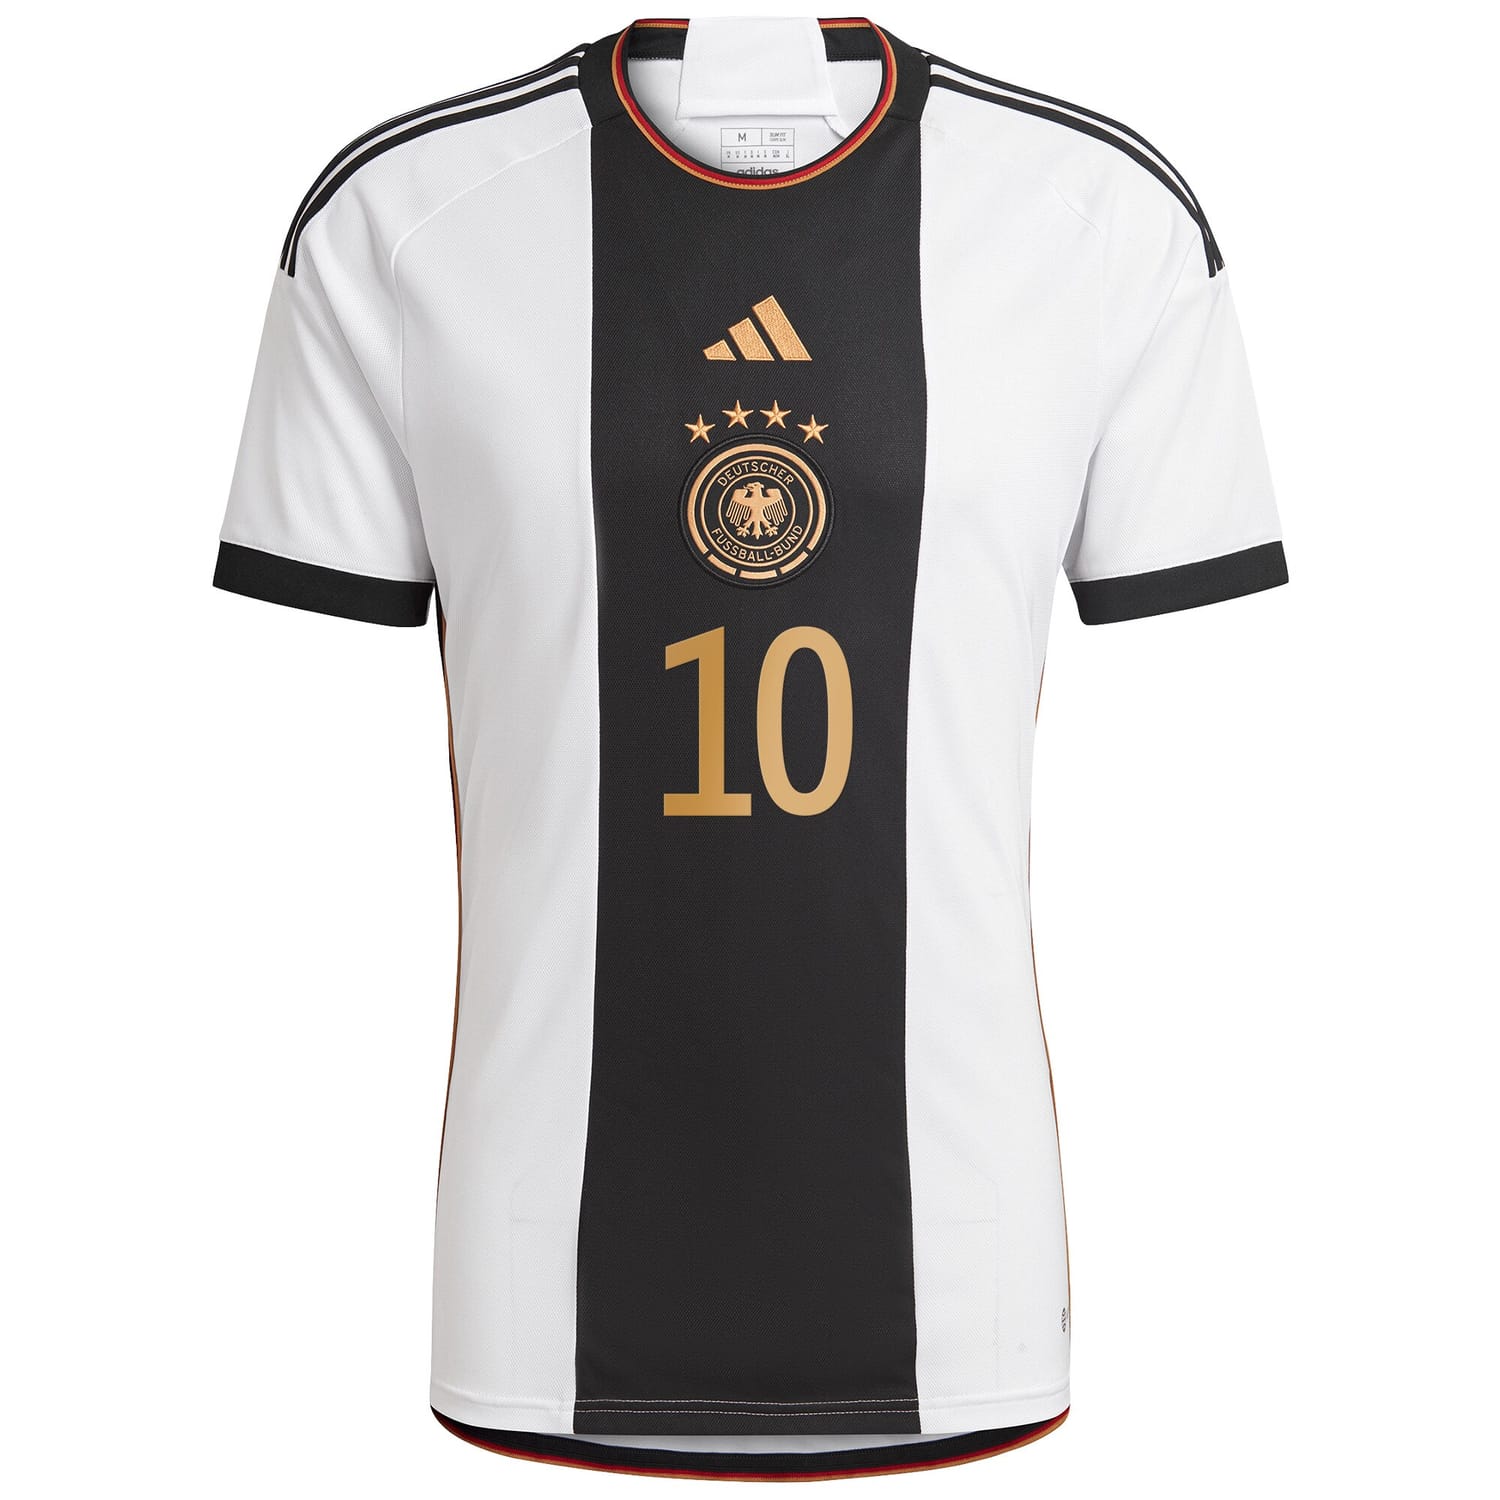 Germany National Team Home Jersey Shirt White 2022-23 player Serge Gnabry printing for Men